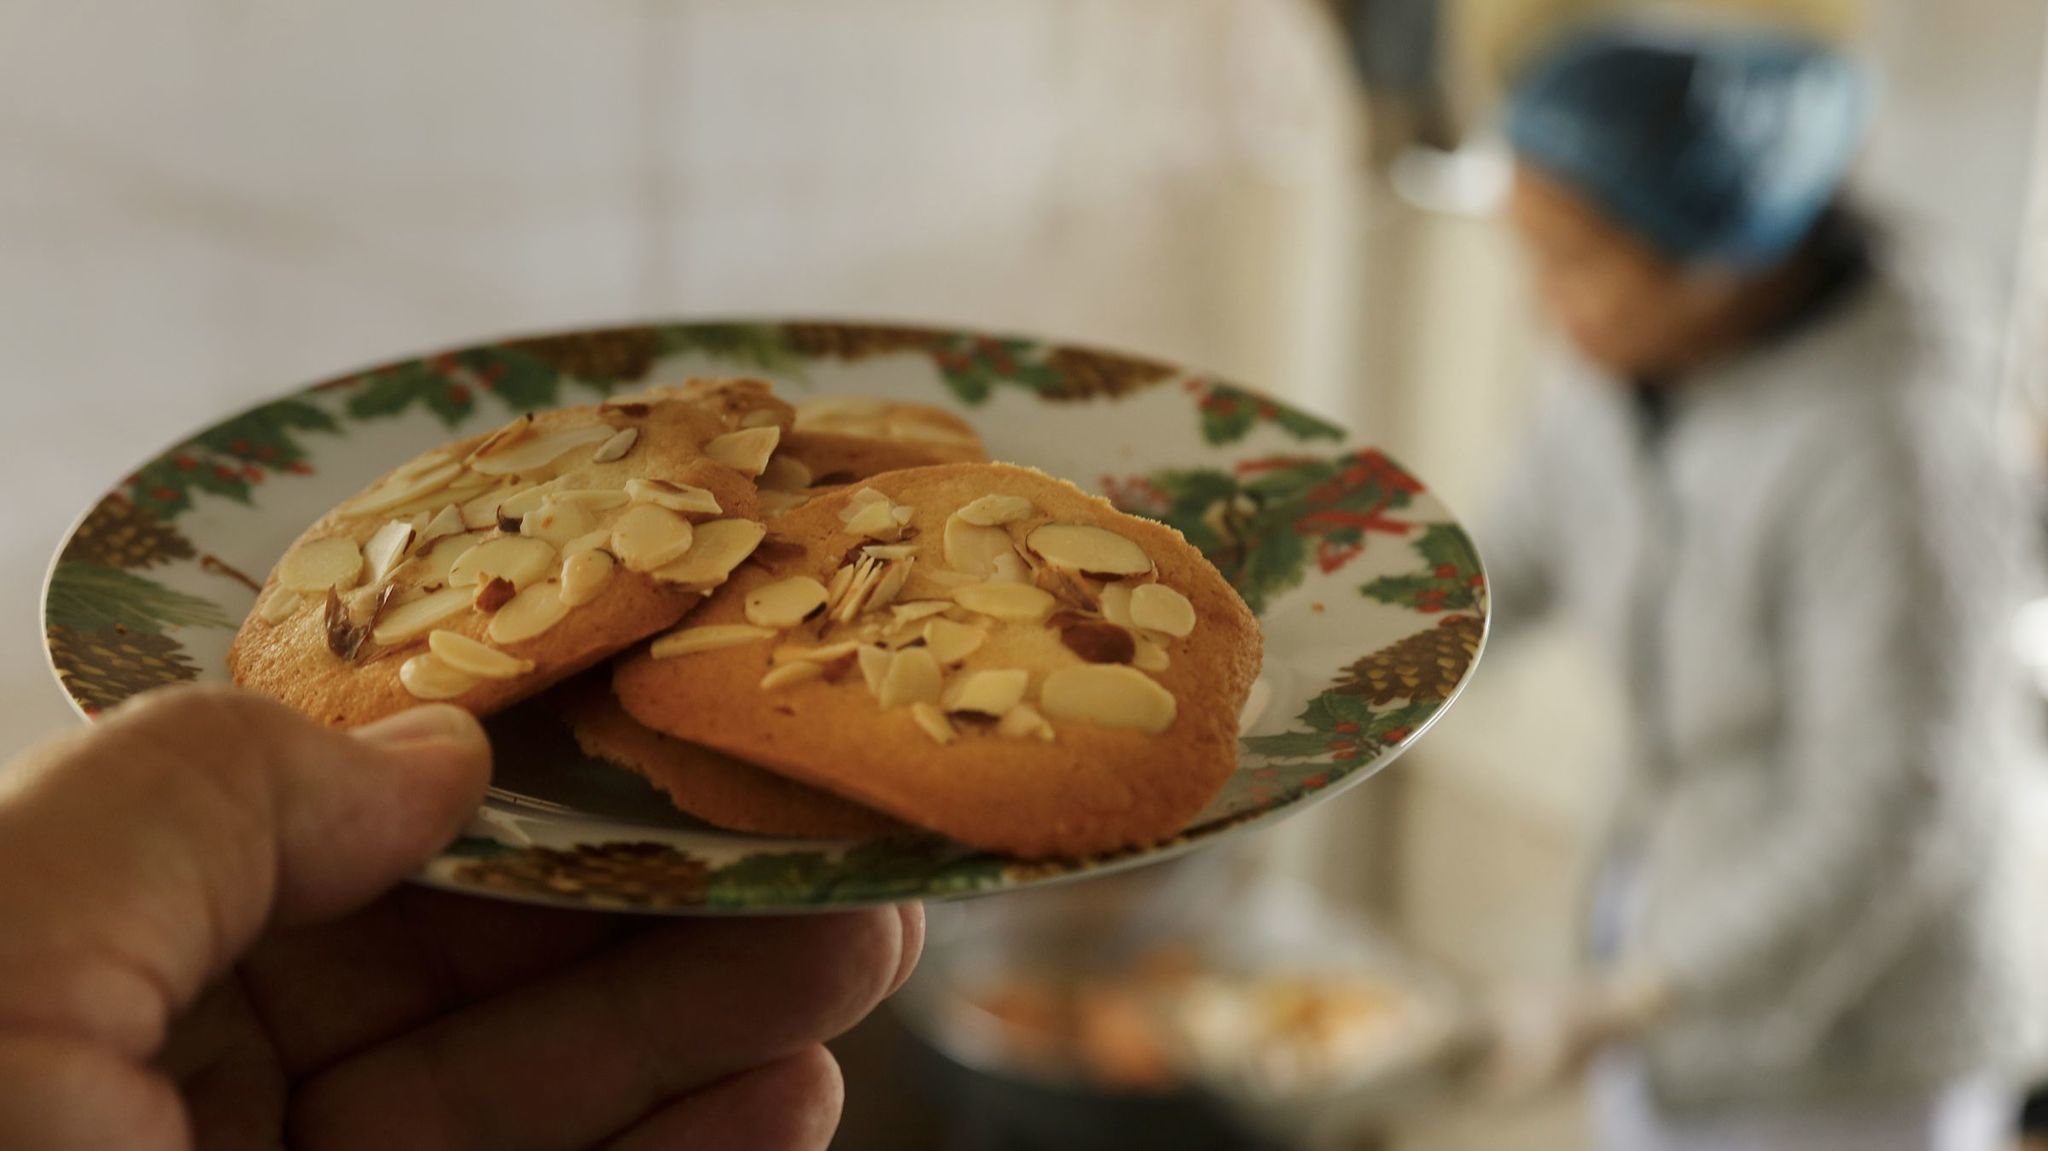 Crispy almond cookies add to Hue Phan's repertoire, baked before the meals are delivered..